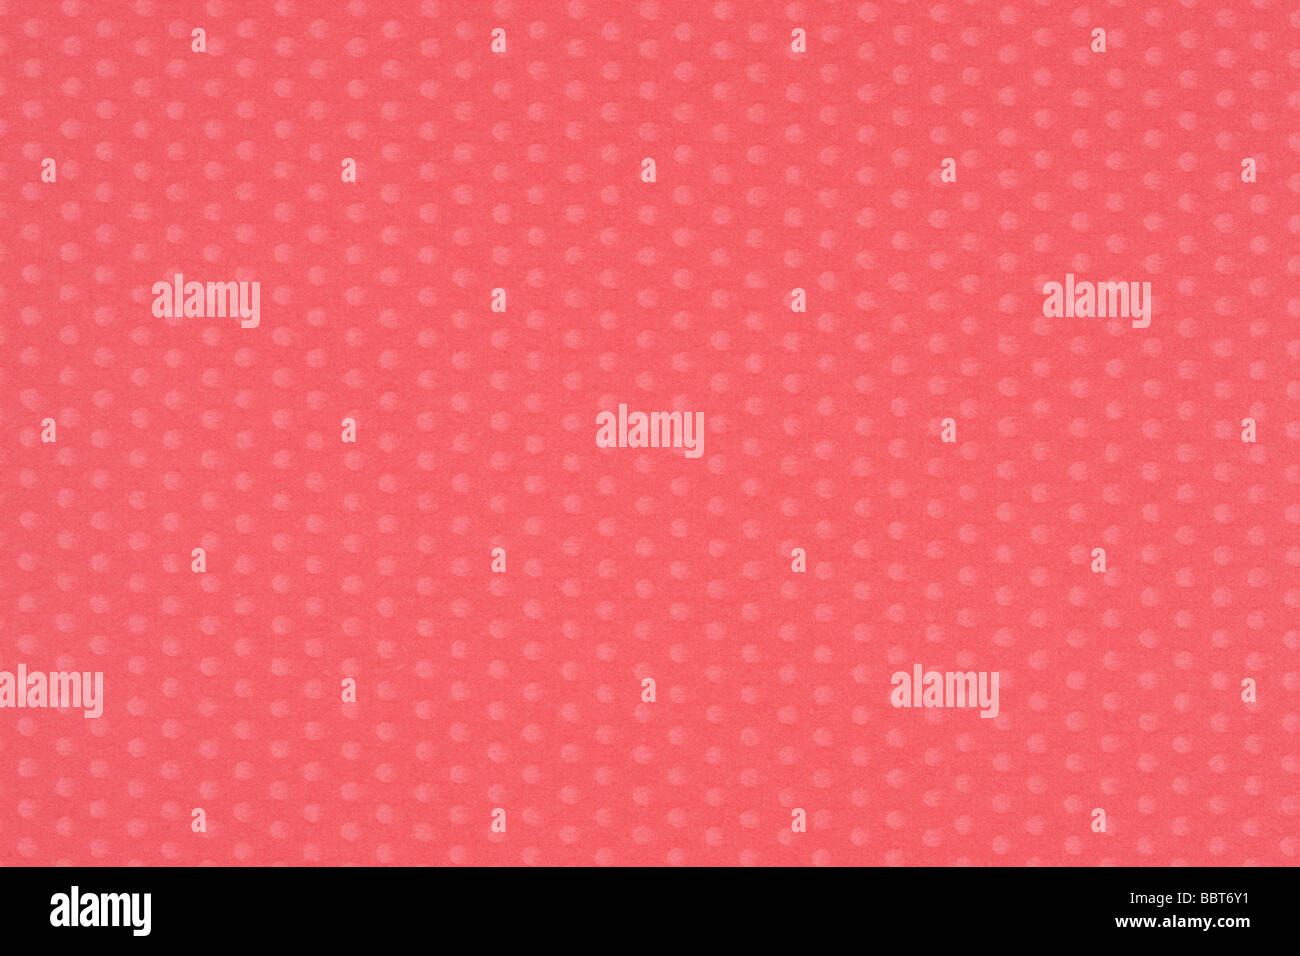 Reddish-pink paper with polka dots Stock Photo